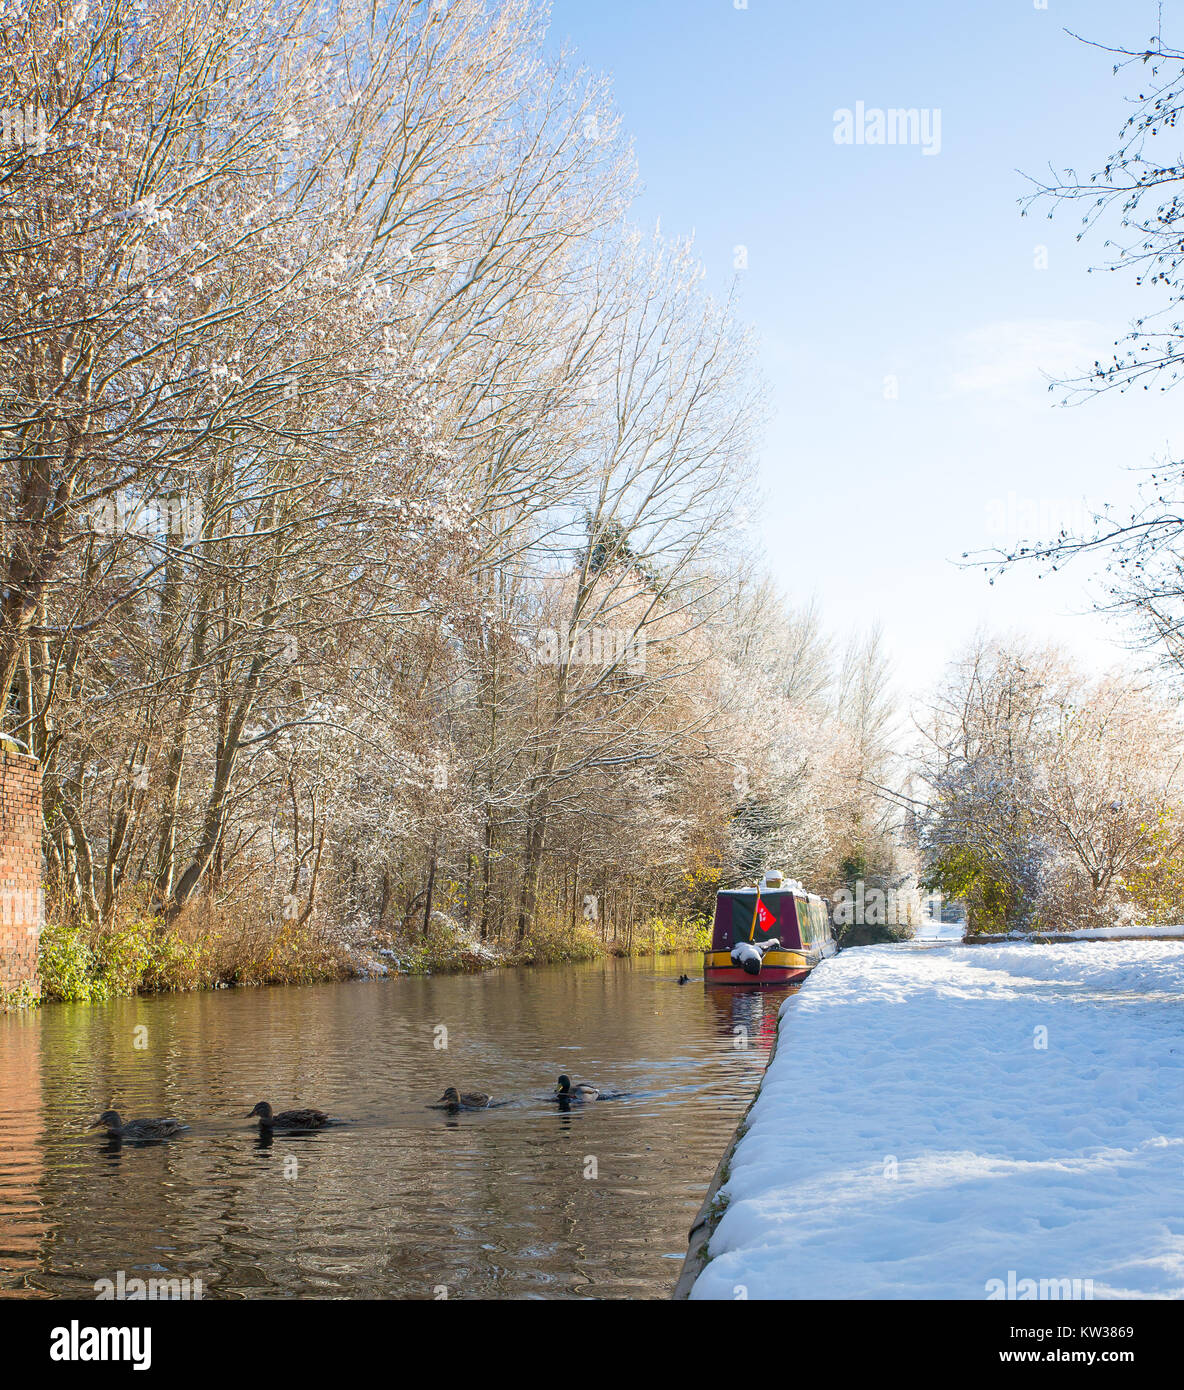 British canals in winter. UK narrowboat moored alongside snow-covered towpath in morning sunshine. Canal boat life in the snow. Stock Photo